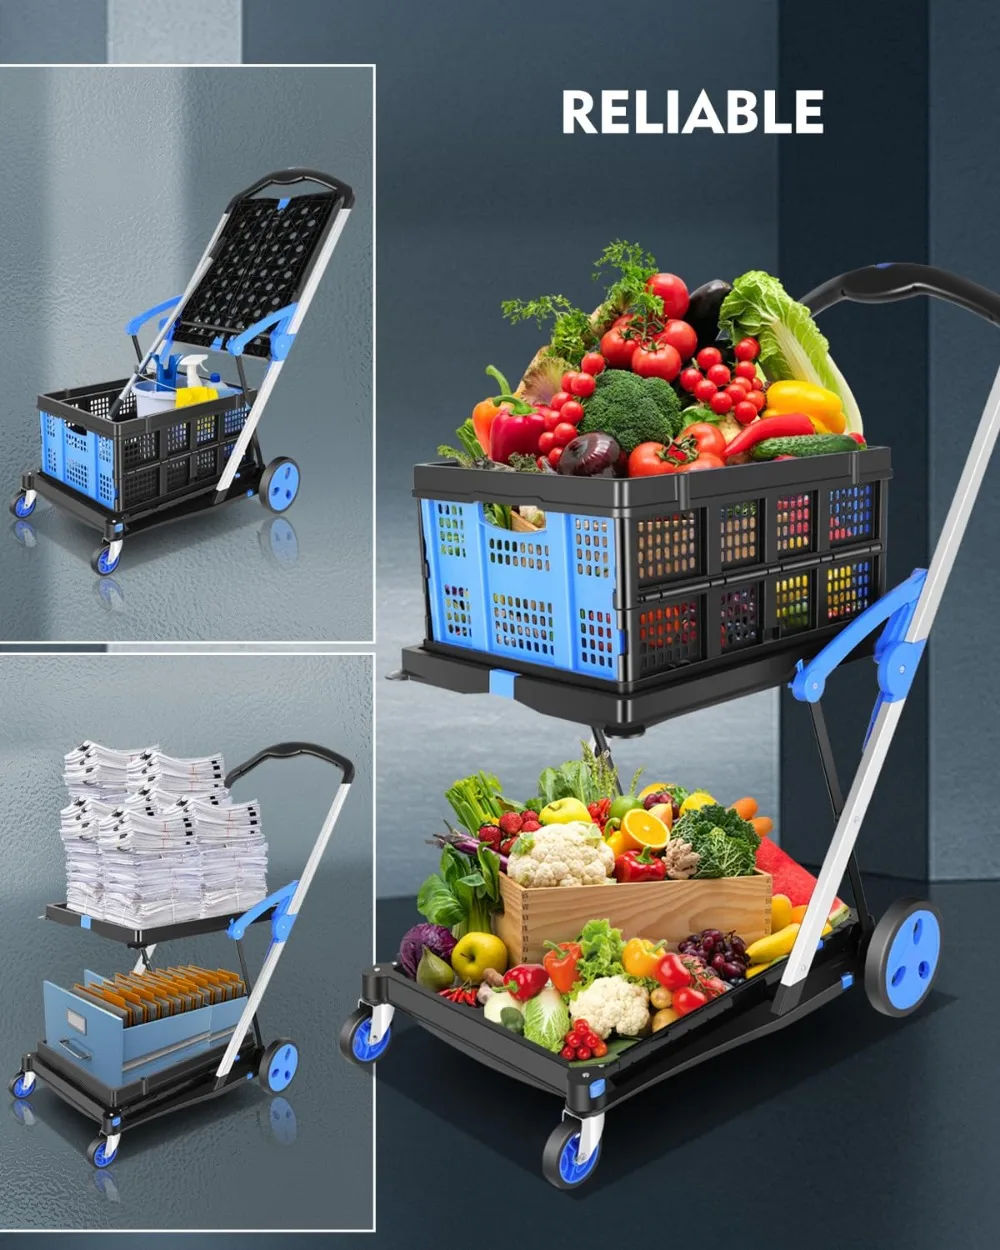 Collapsible-Utility-Cart-Multi-Use-Functional-Collapsible-Shopping-Carts-2-Tier-Collapsible-Shopping-Cart-with-Baskets-3